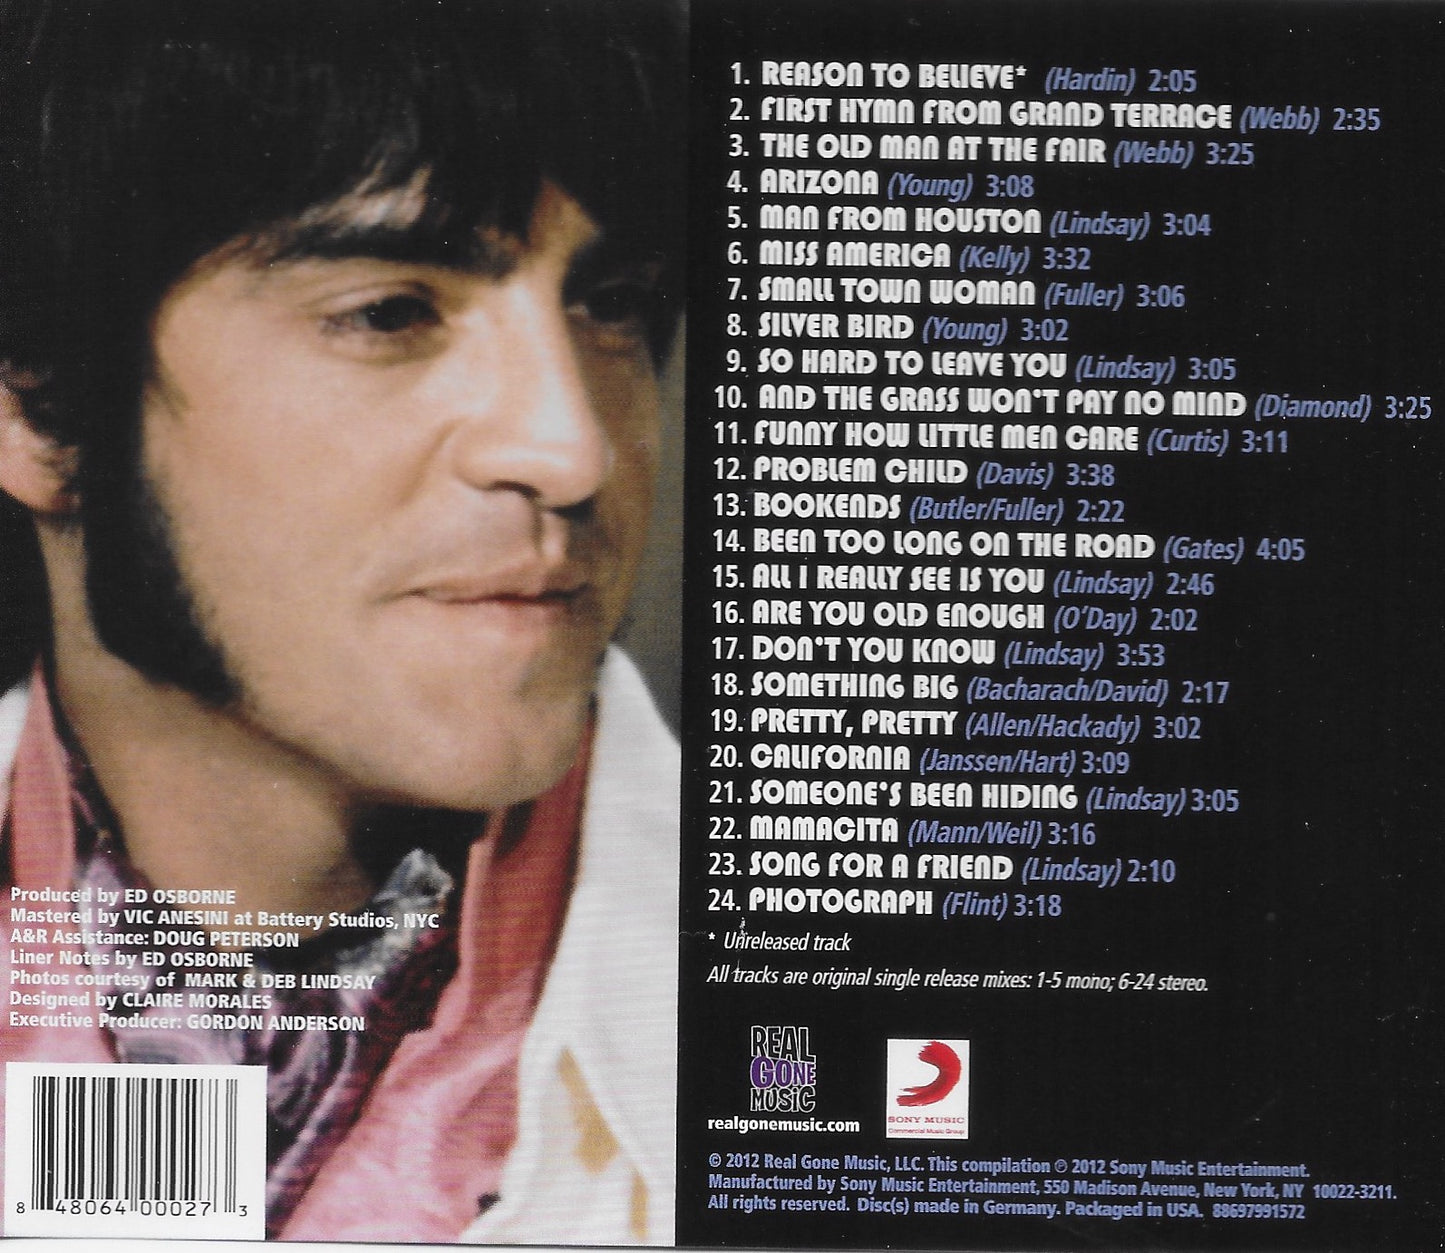 COMPLETE COLUMBIA SINGLES CD - Mark Lindsay - Personally Autographed to YOU